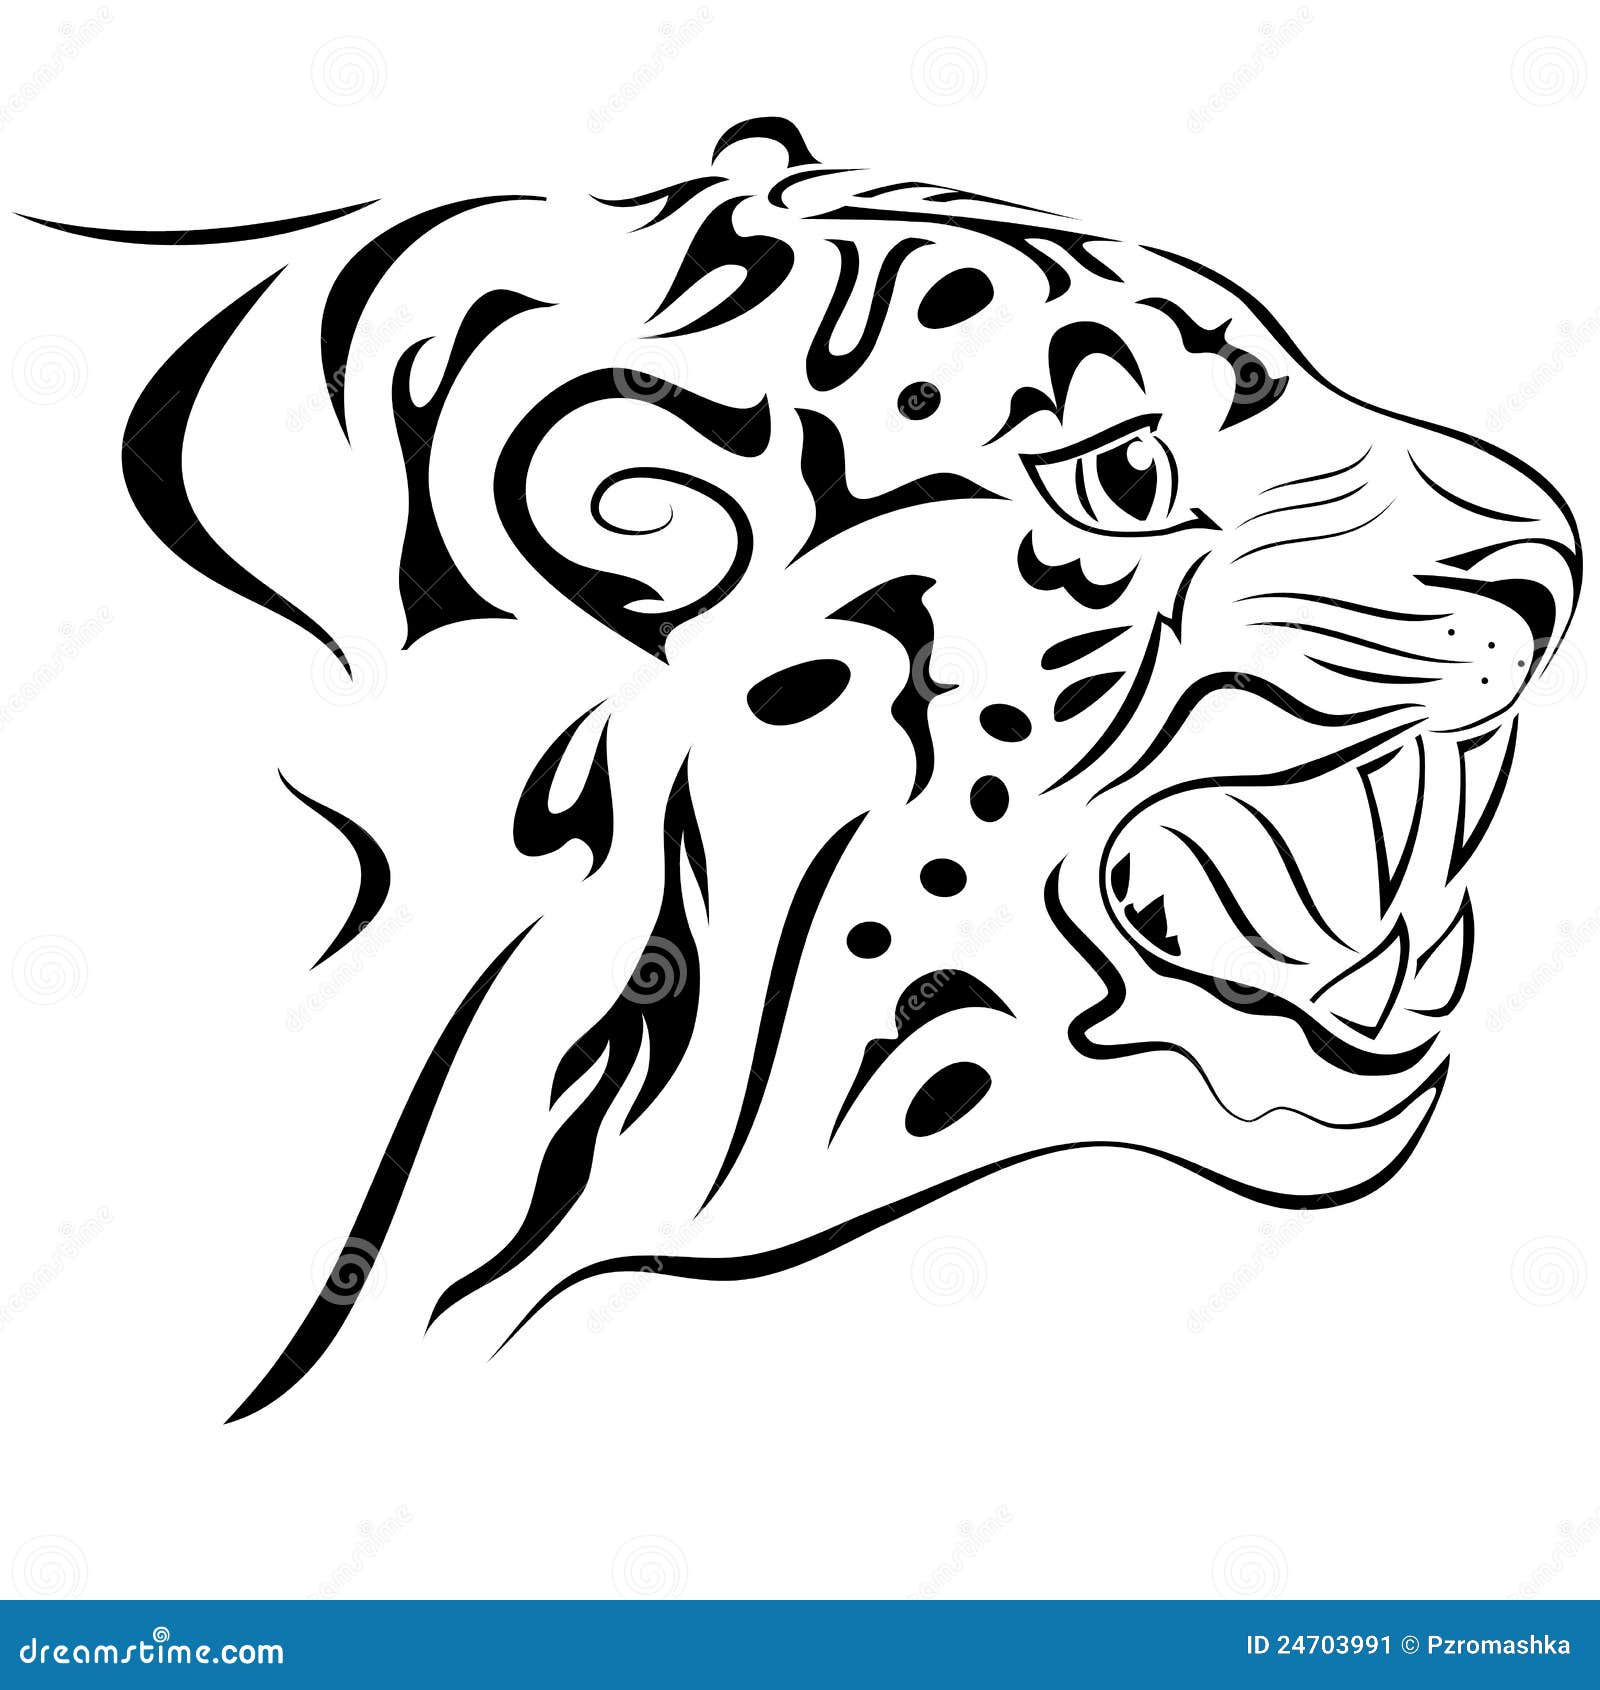 Ep. 115 - How to draw lion head tribal tattoo design #2 - YouTube